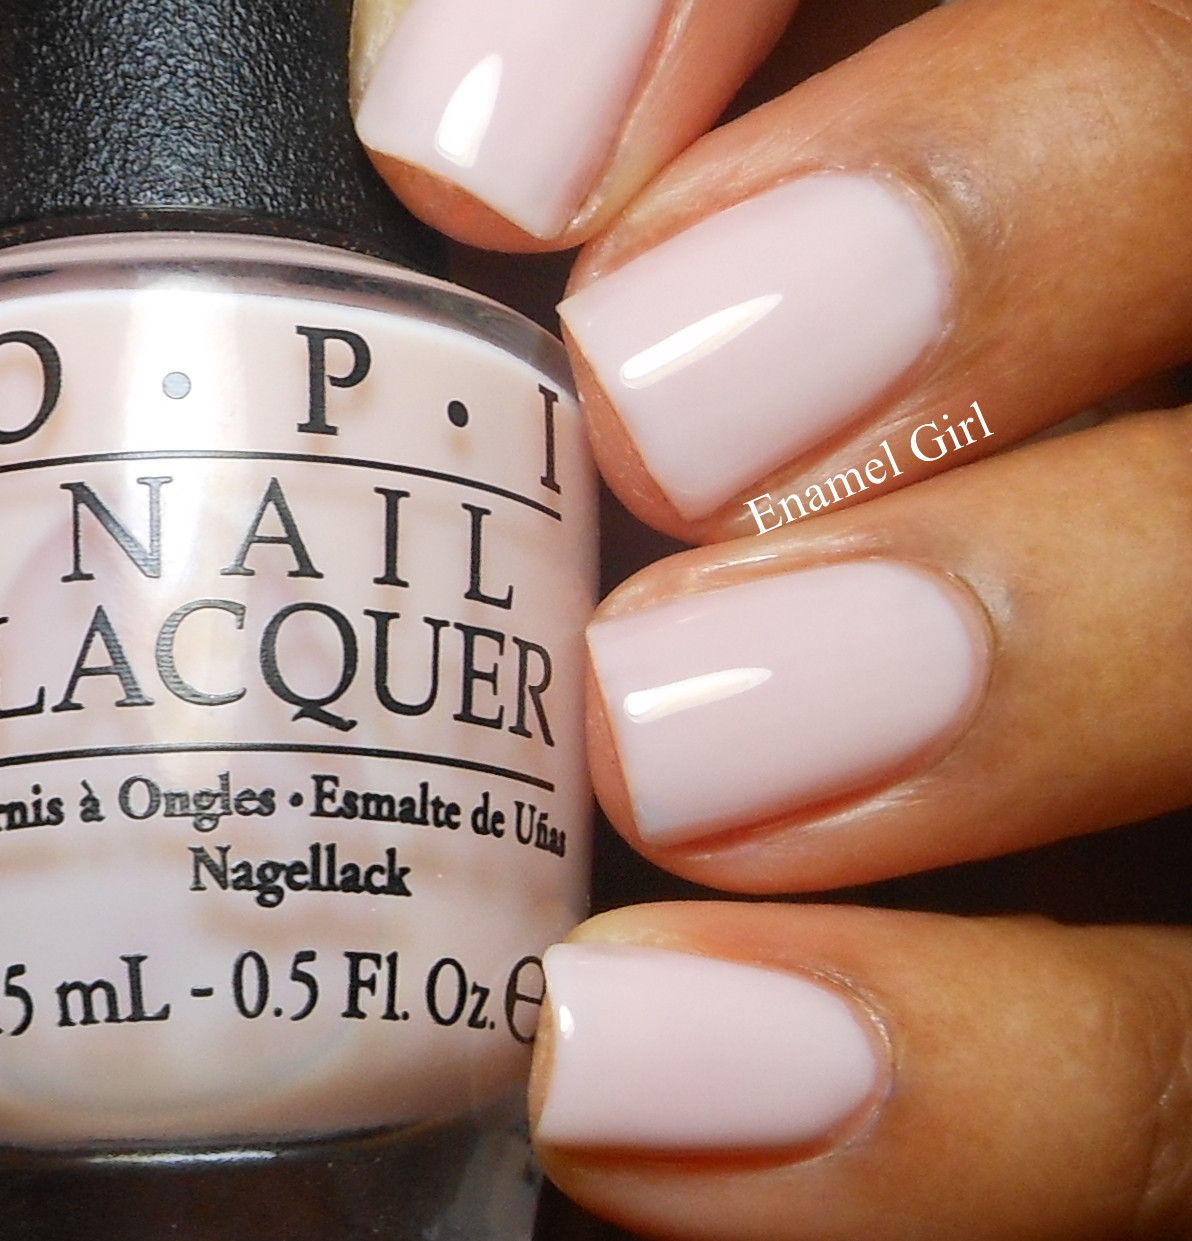 Wedding Nail Polish Colors
 Enamel Girl OPI OZ The Great and Powerful Collection